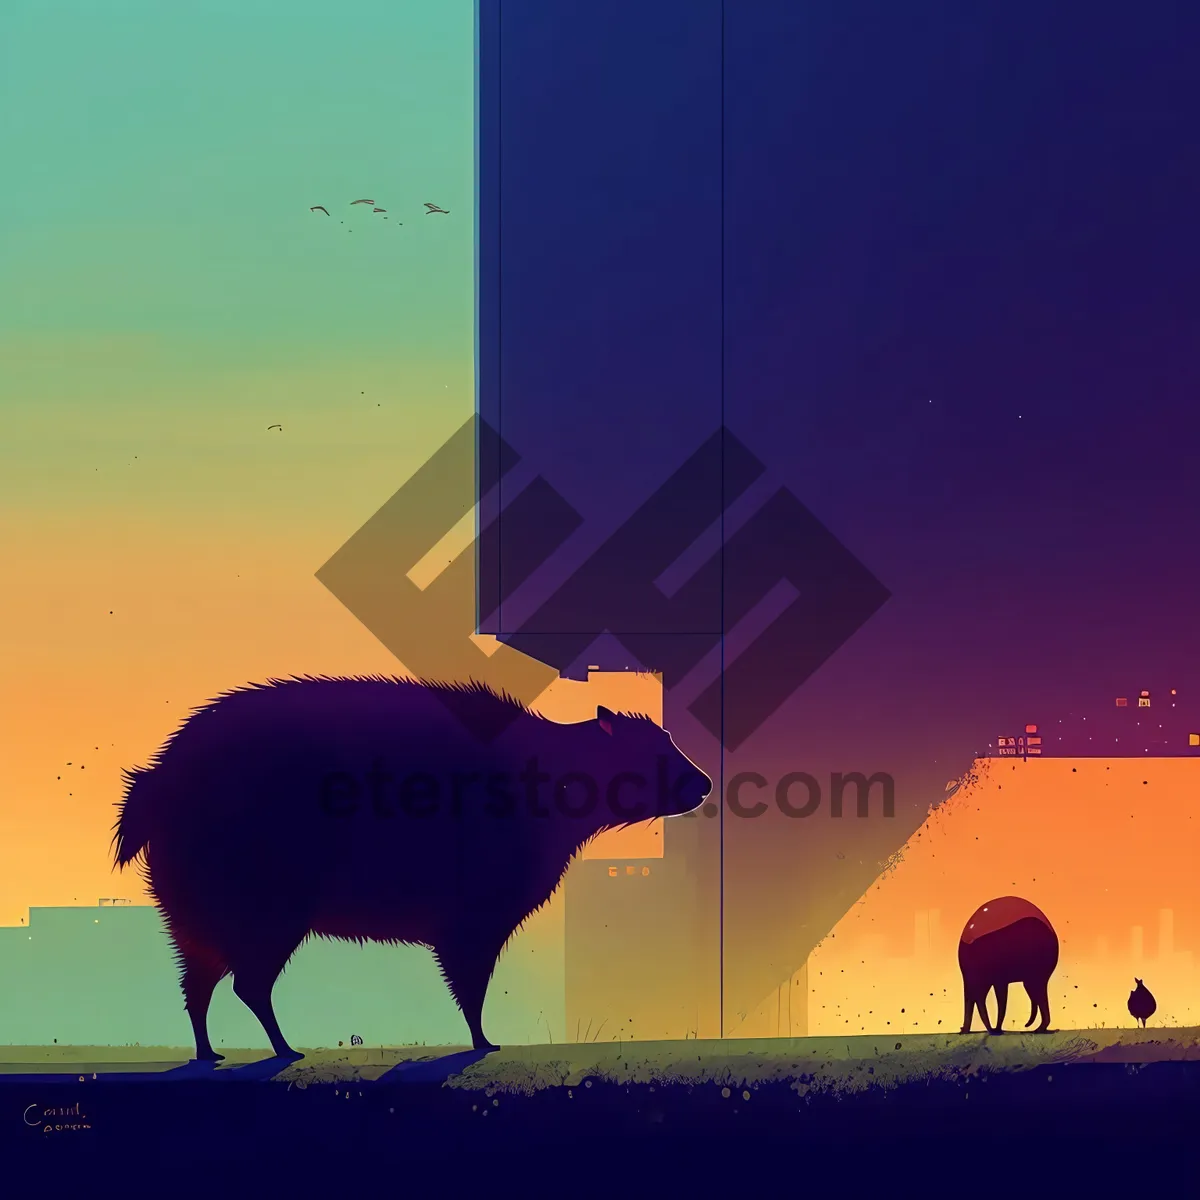 Picture of Idyllic Skyline with Grazing Livestock: Bulls, Cows, and Buffalos by Water's Edge